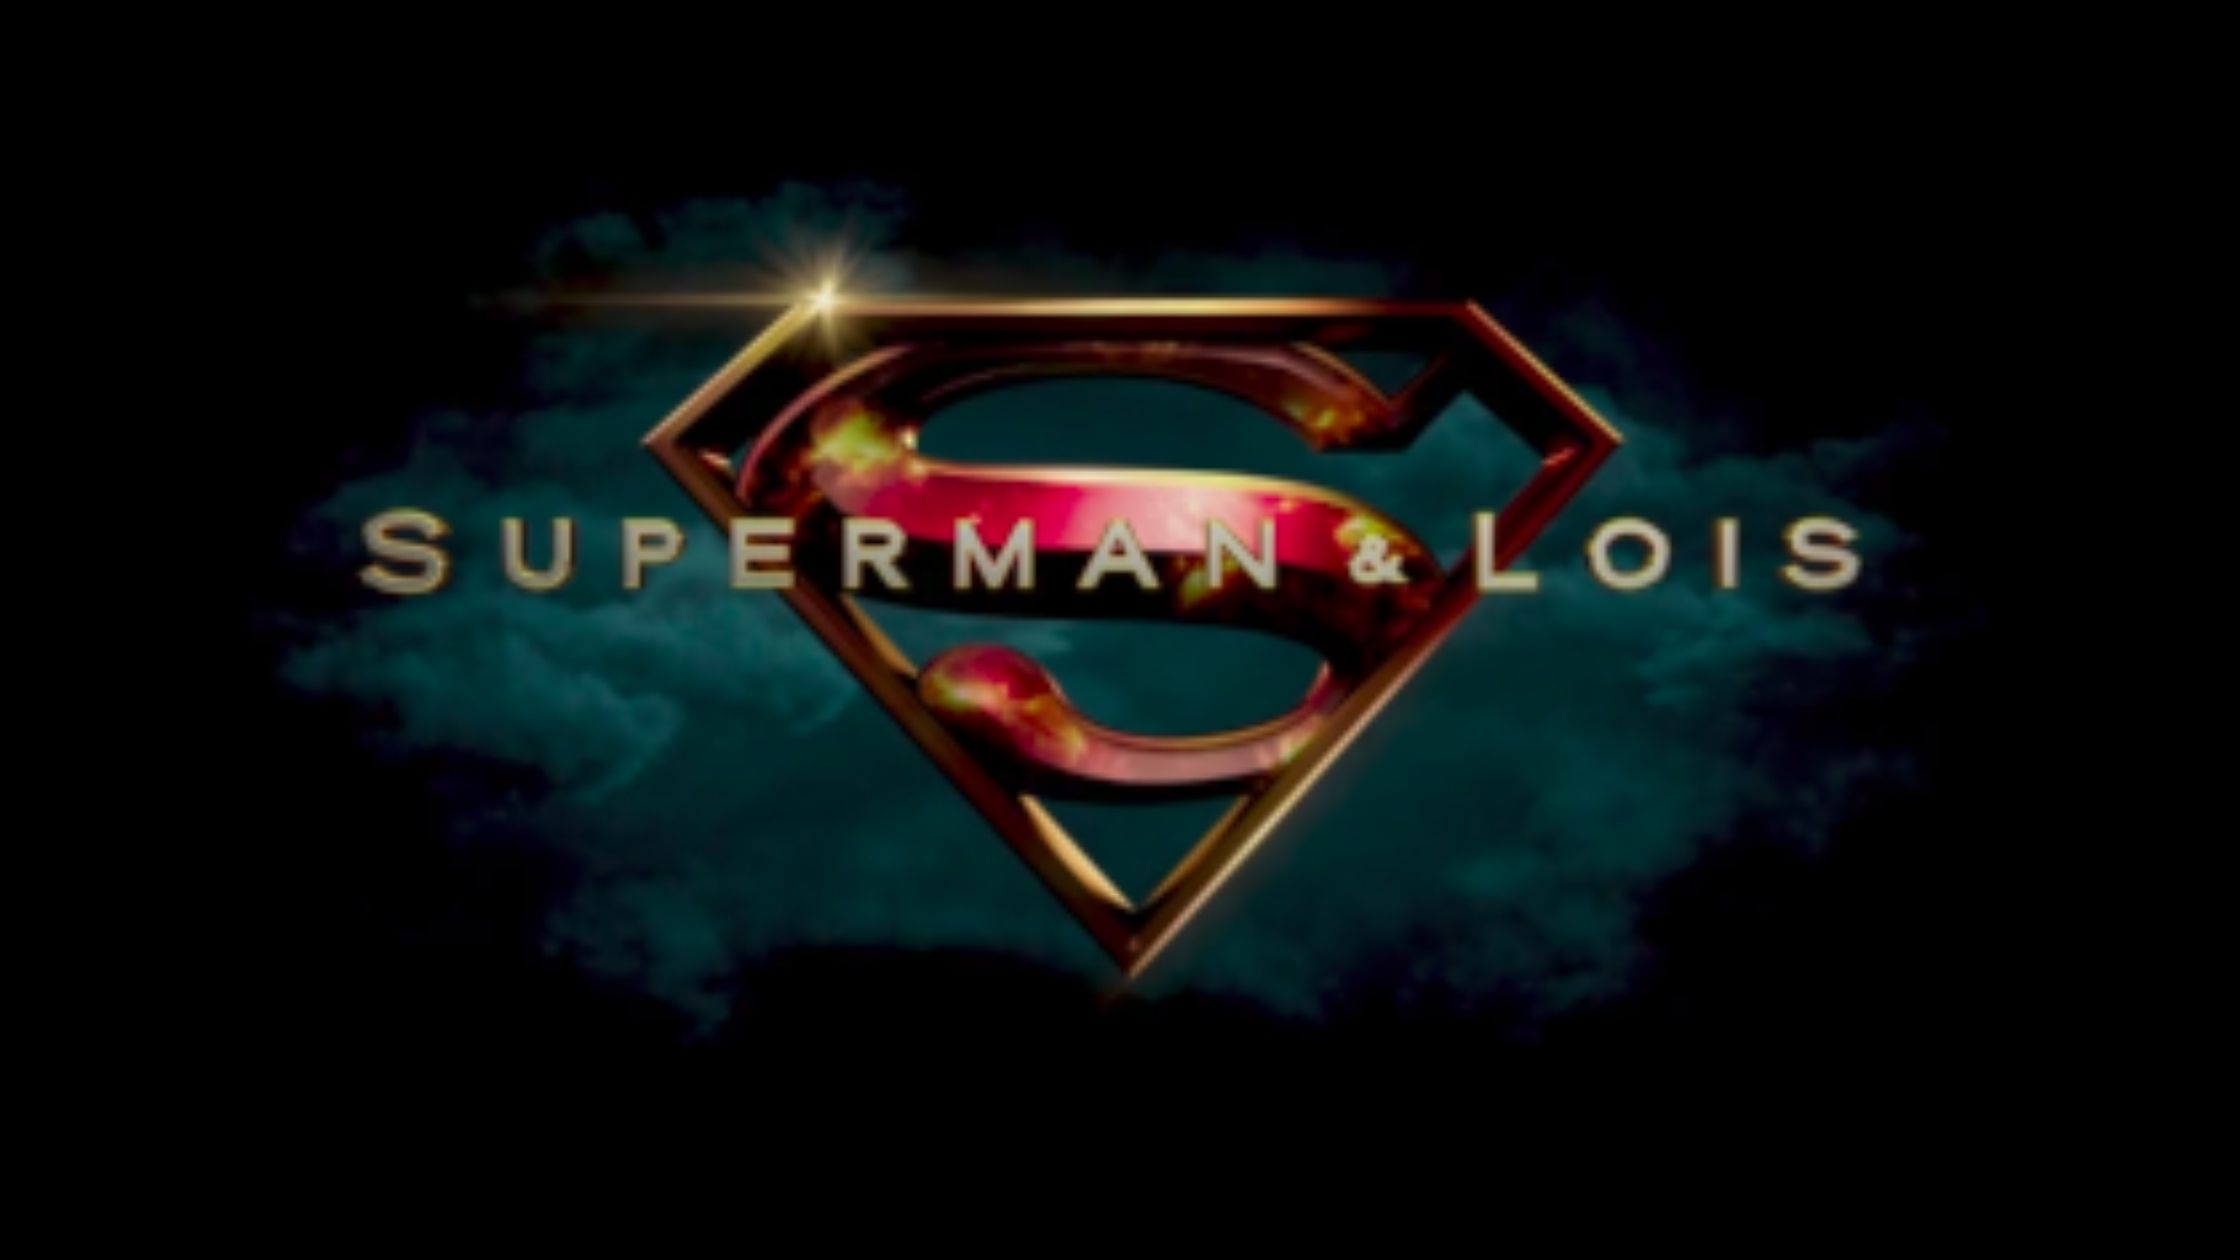 Superman And Lois Season 2: What Can We Expect In The Upcoming Episodes?